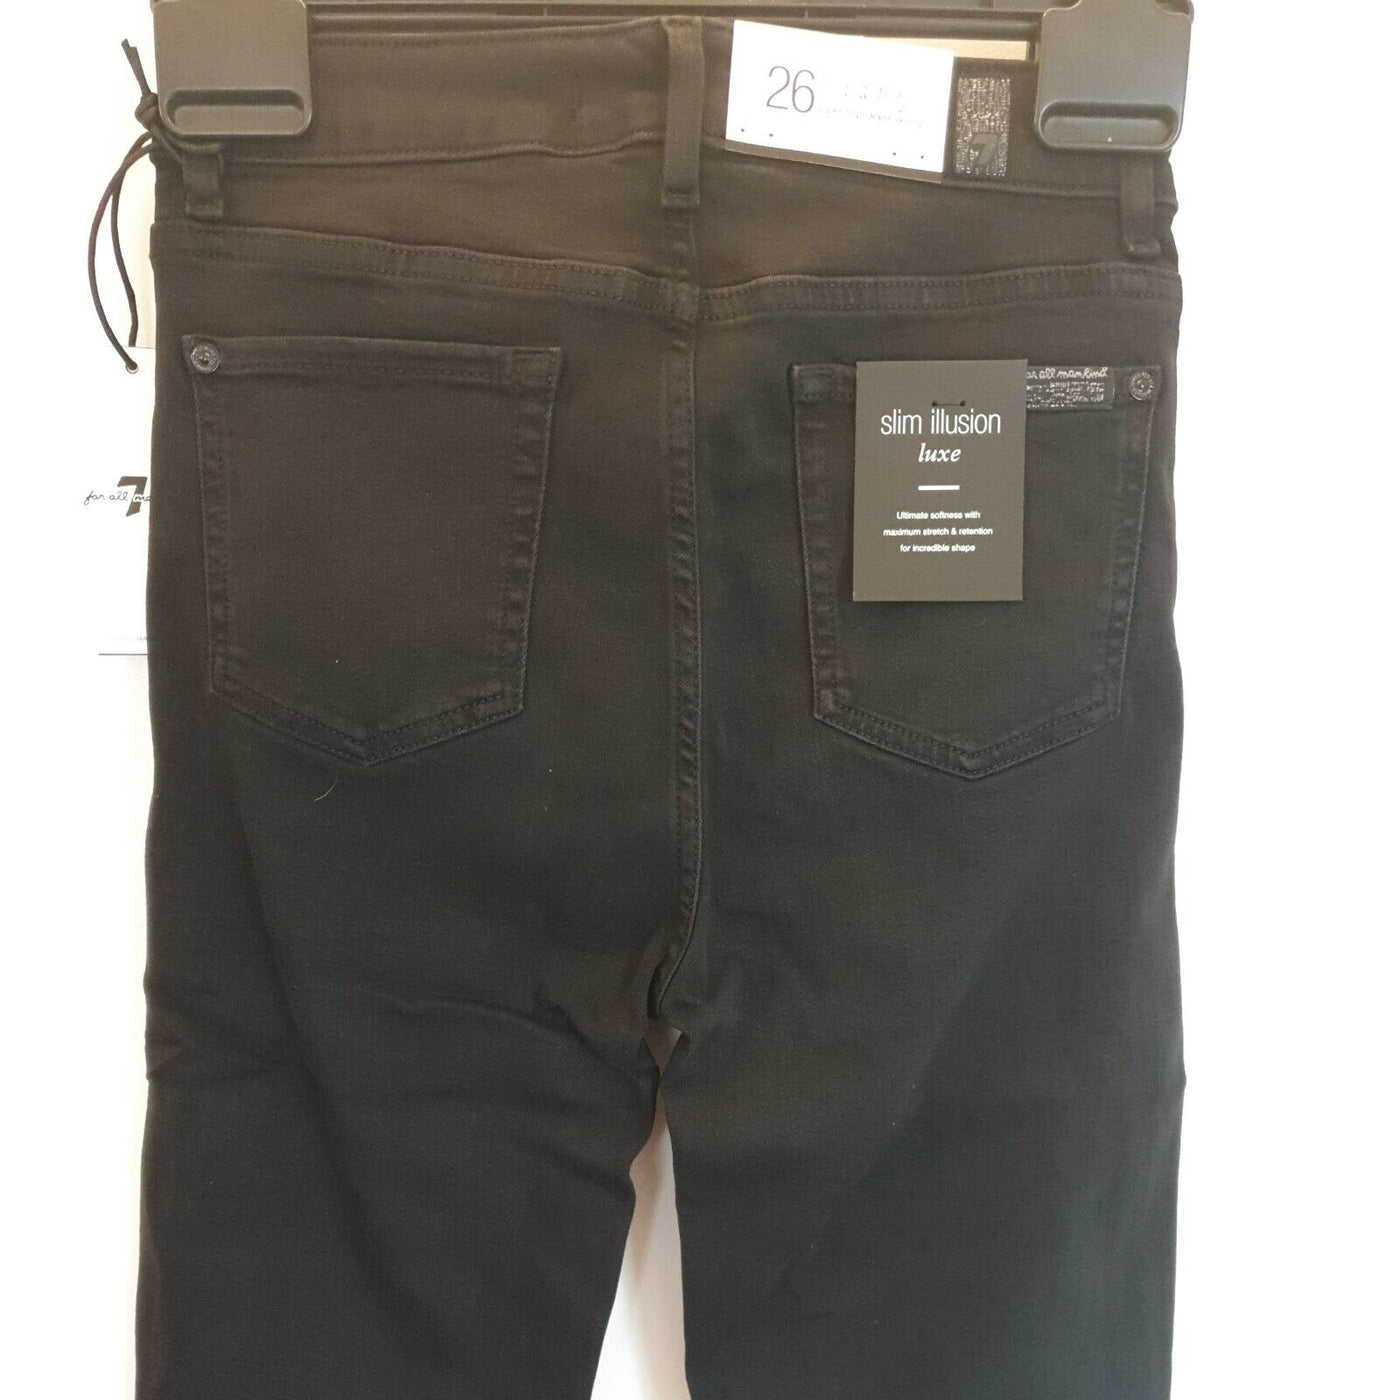 for all mankind jeans Aubrey Slim Illusion Luxe Gravity Jeans Black Size...